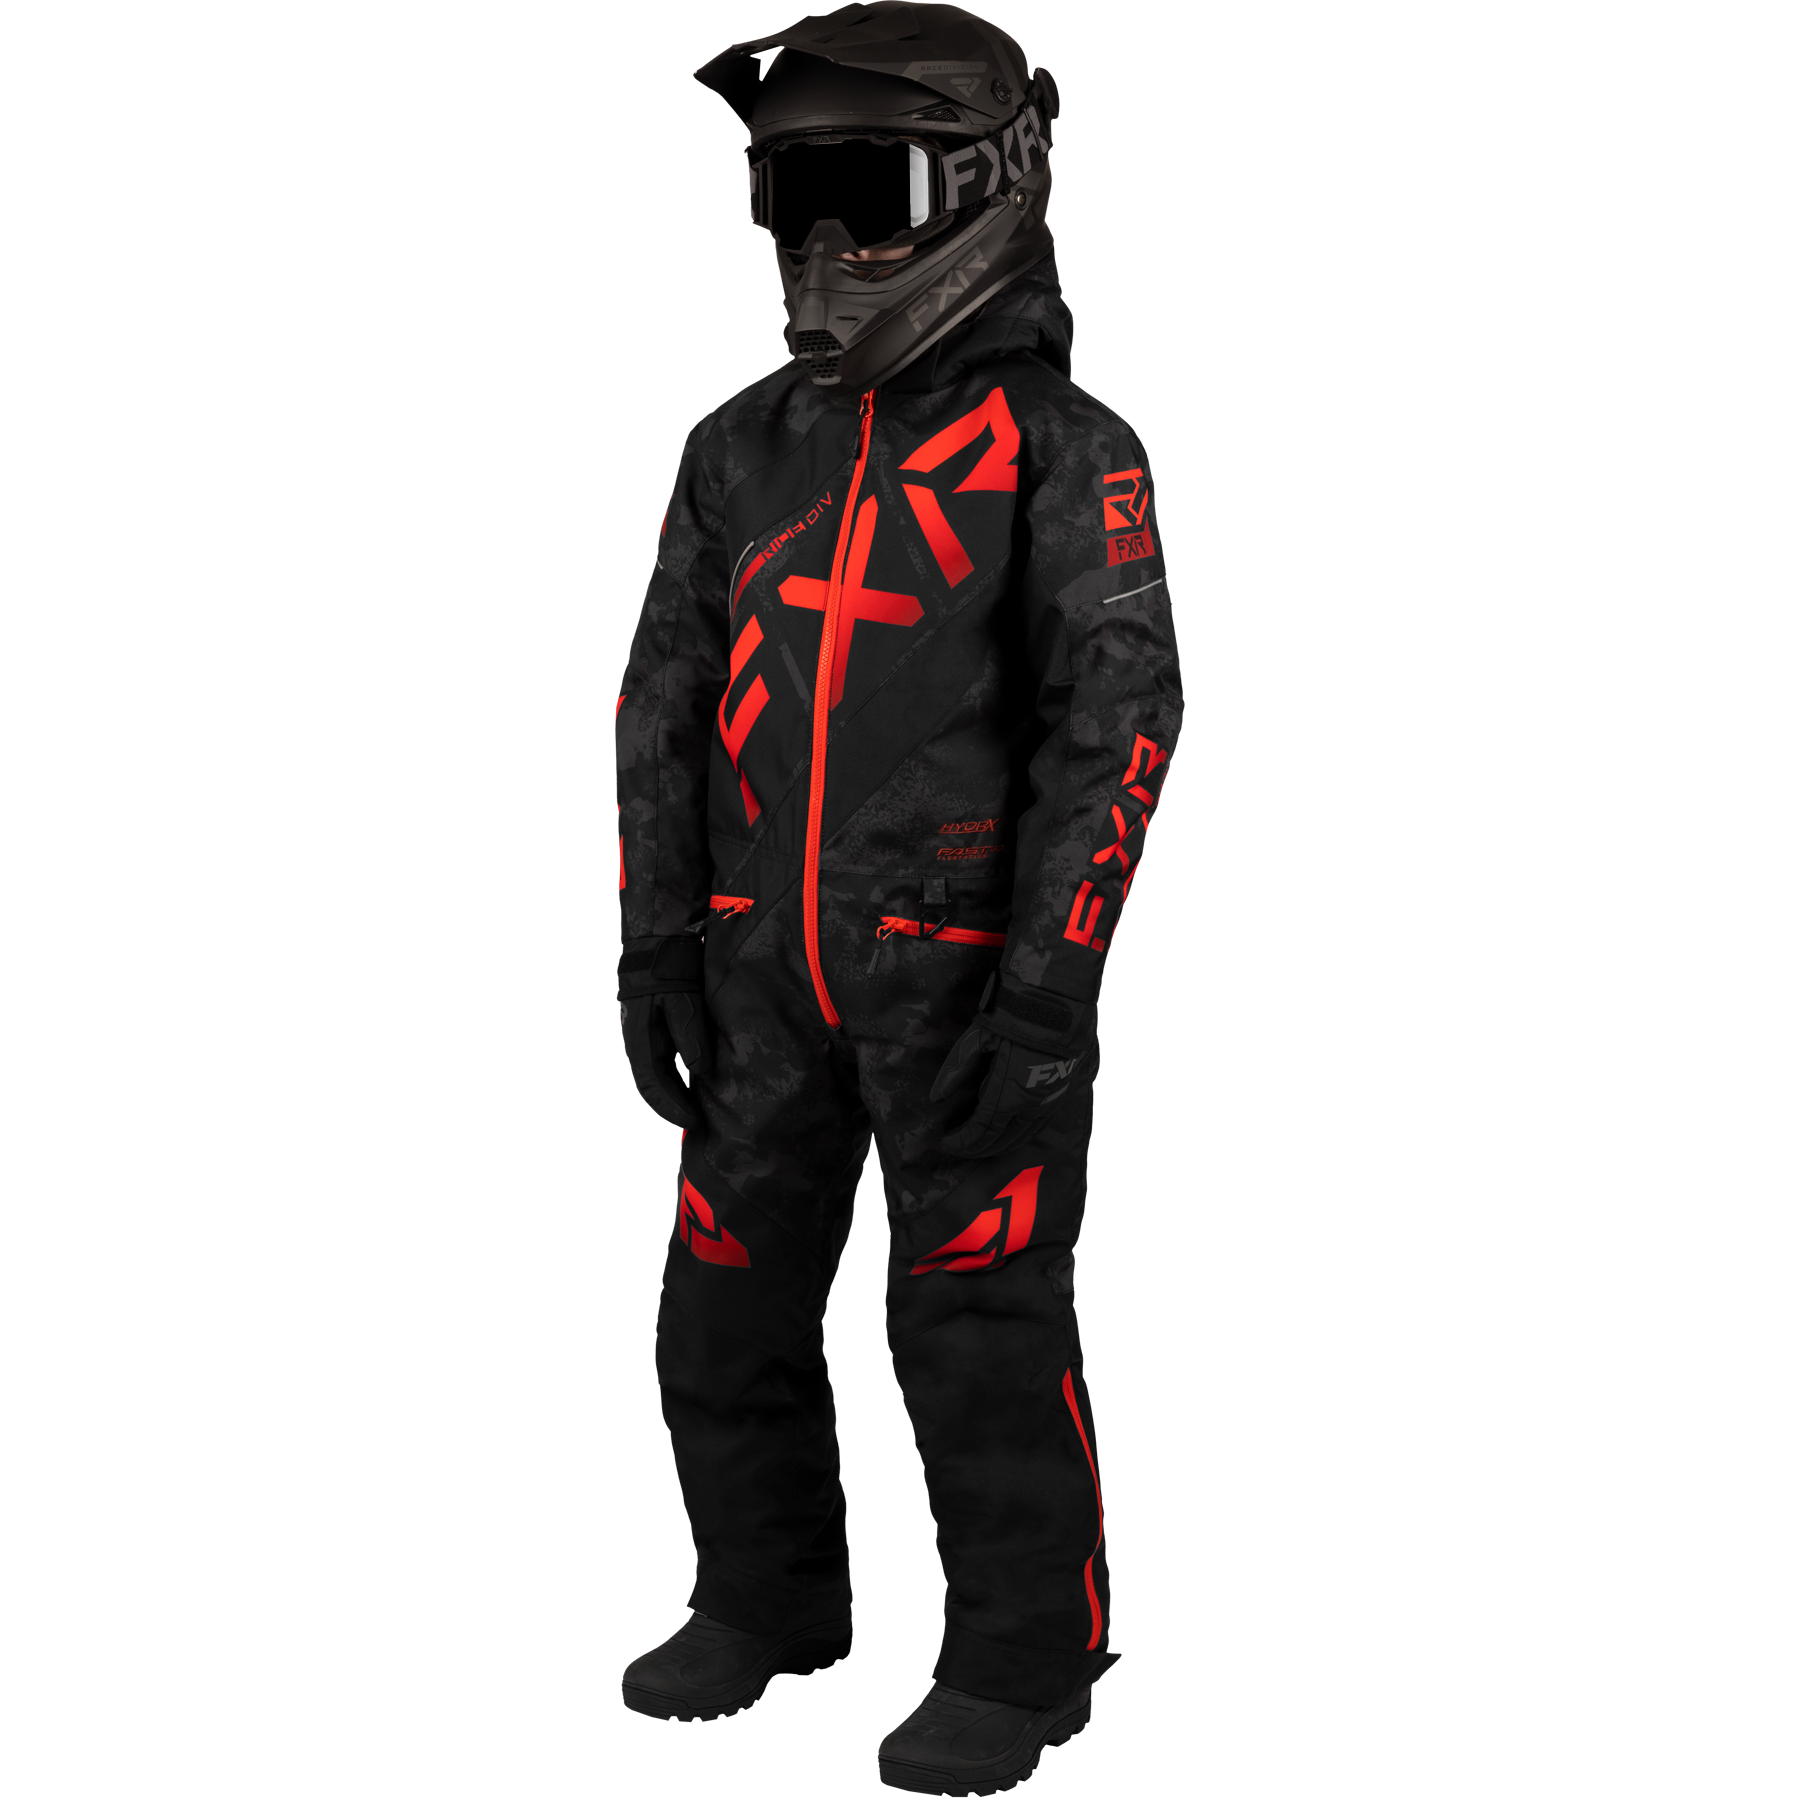 Onepiece FXR Child/Youth CX, Black Camo/Red Fade